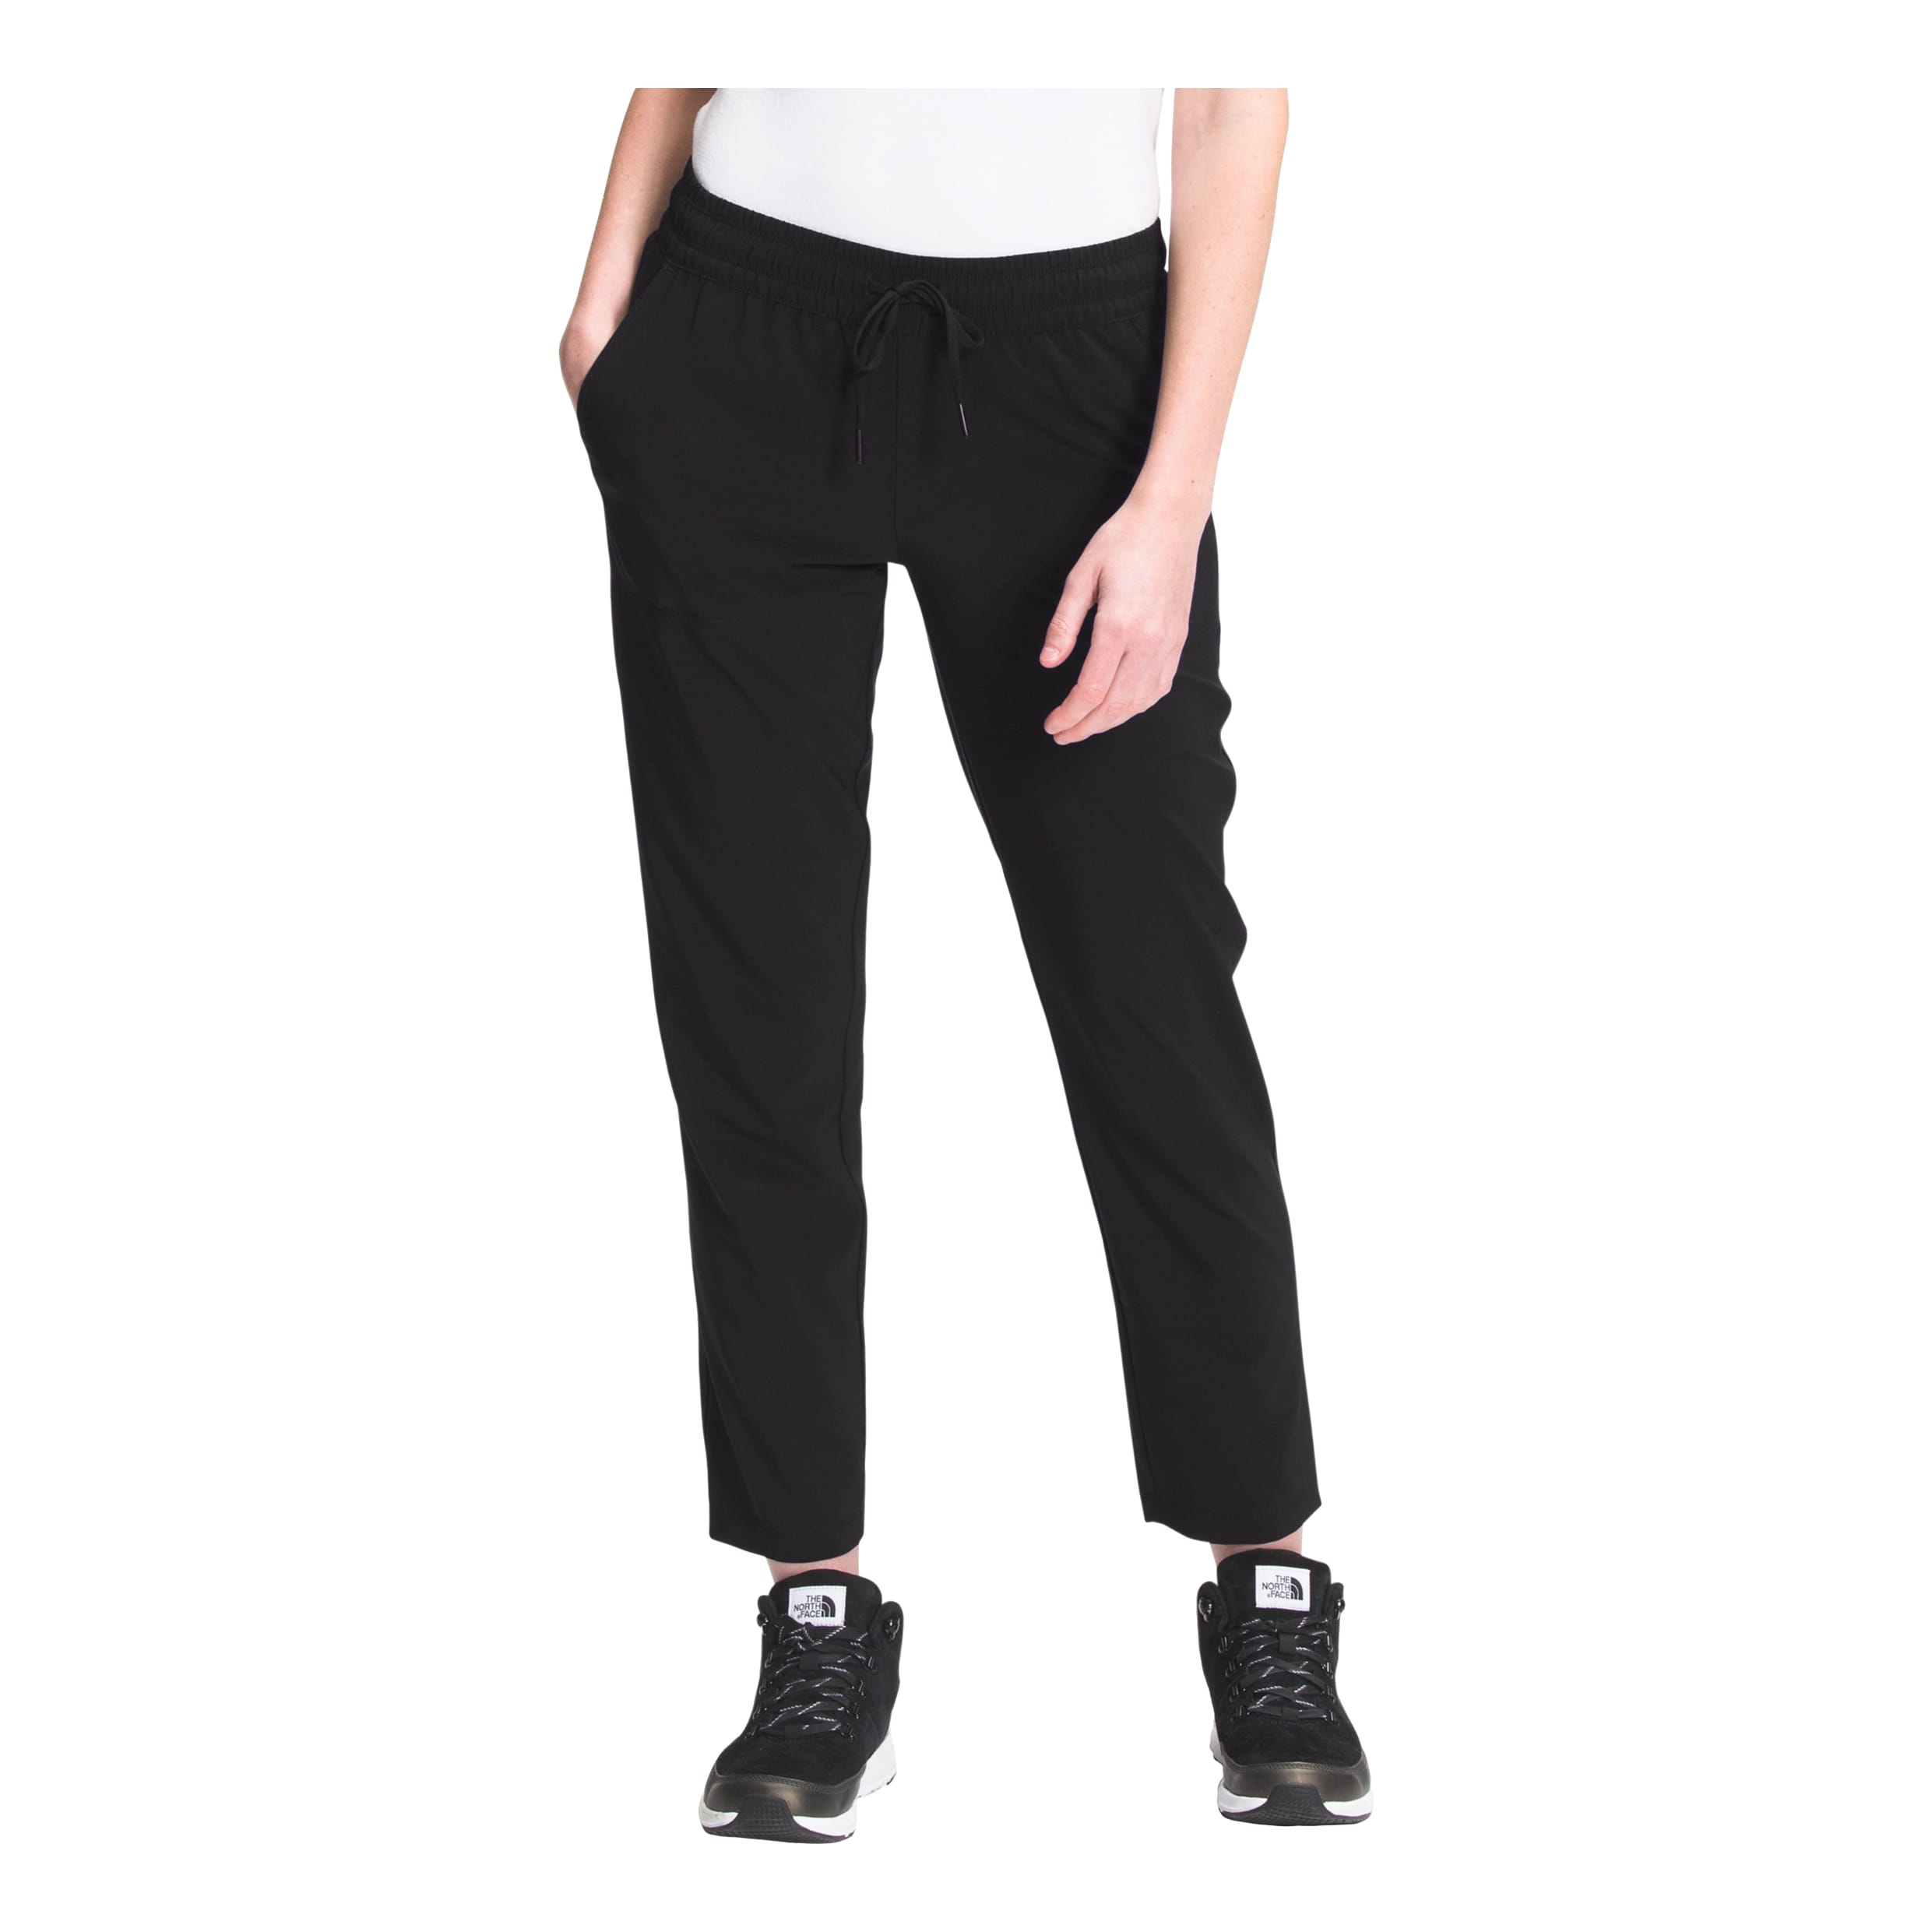 The North Face Aphrodite Motion Pants Women's Clearance